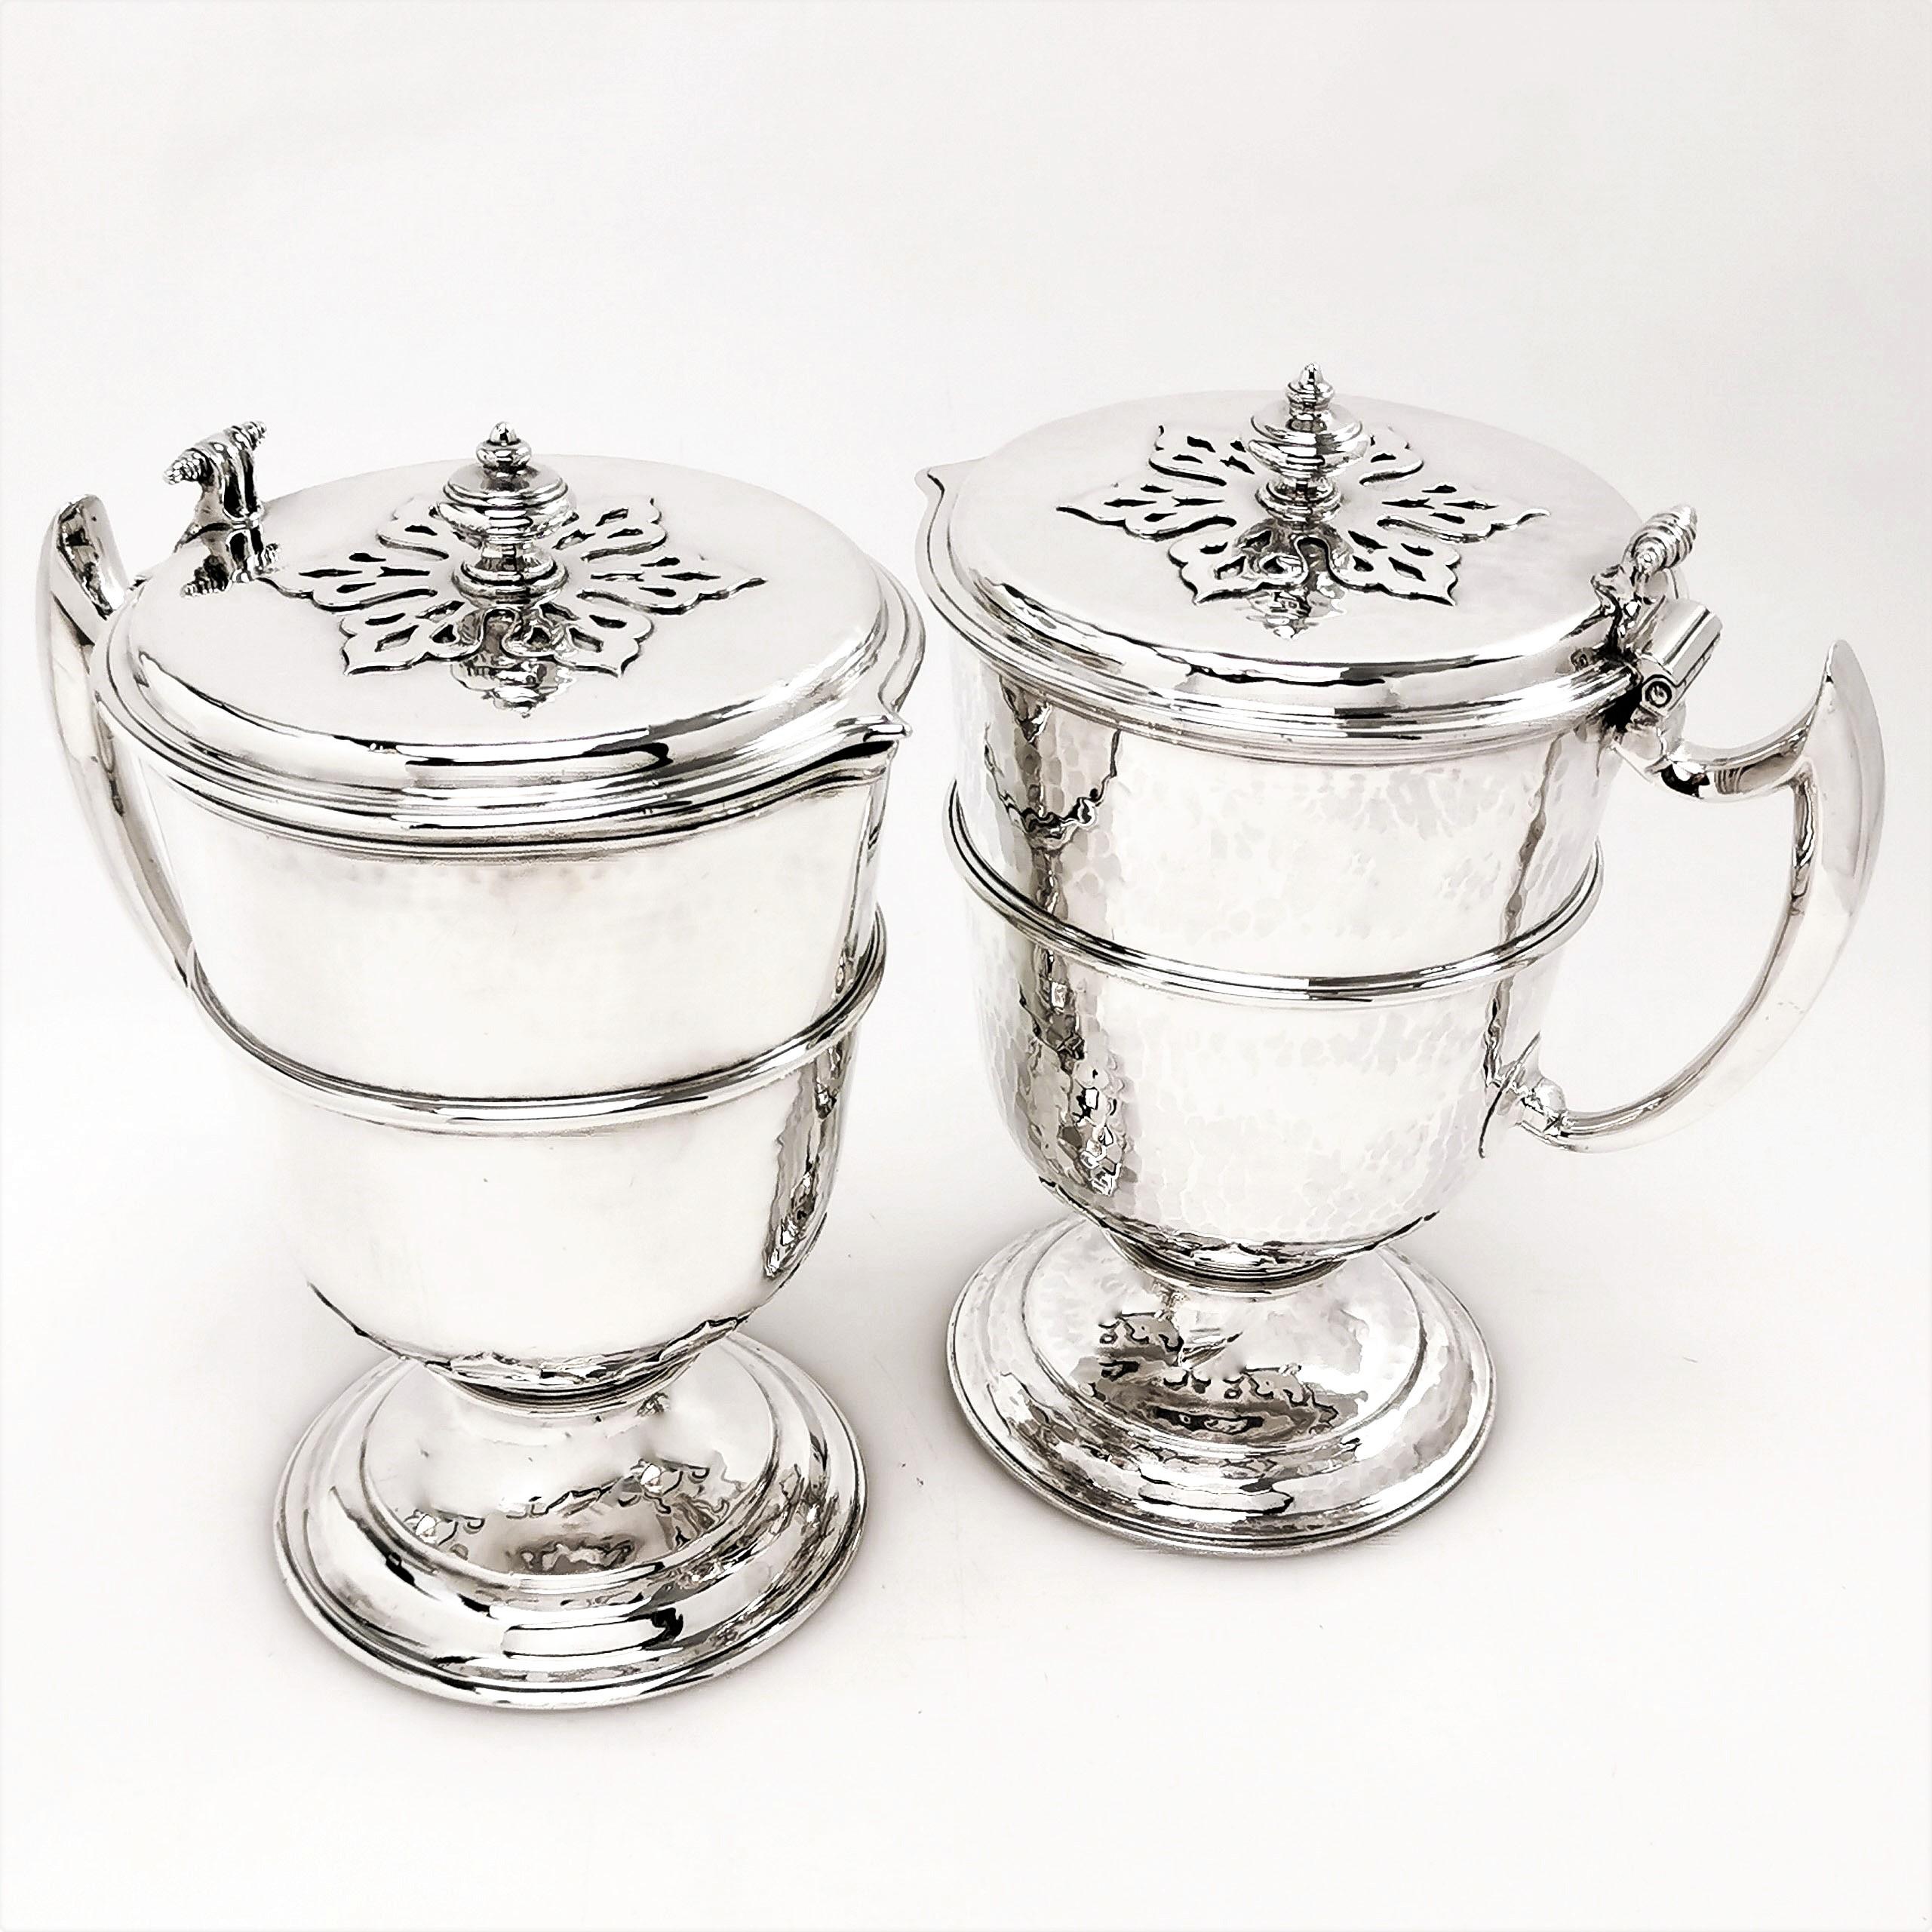 William and Mary Sterling Silver Pair Jugs / Ewers in William & Mary Livery Jug Style 1907-1908